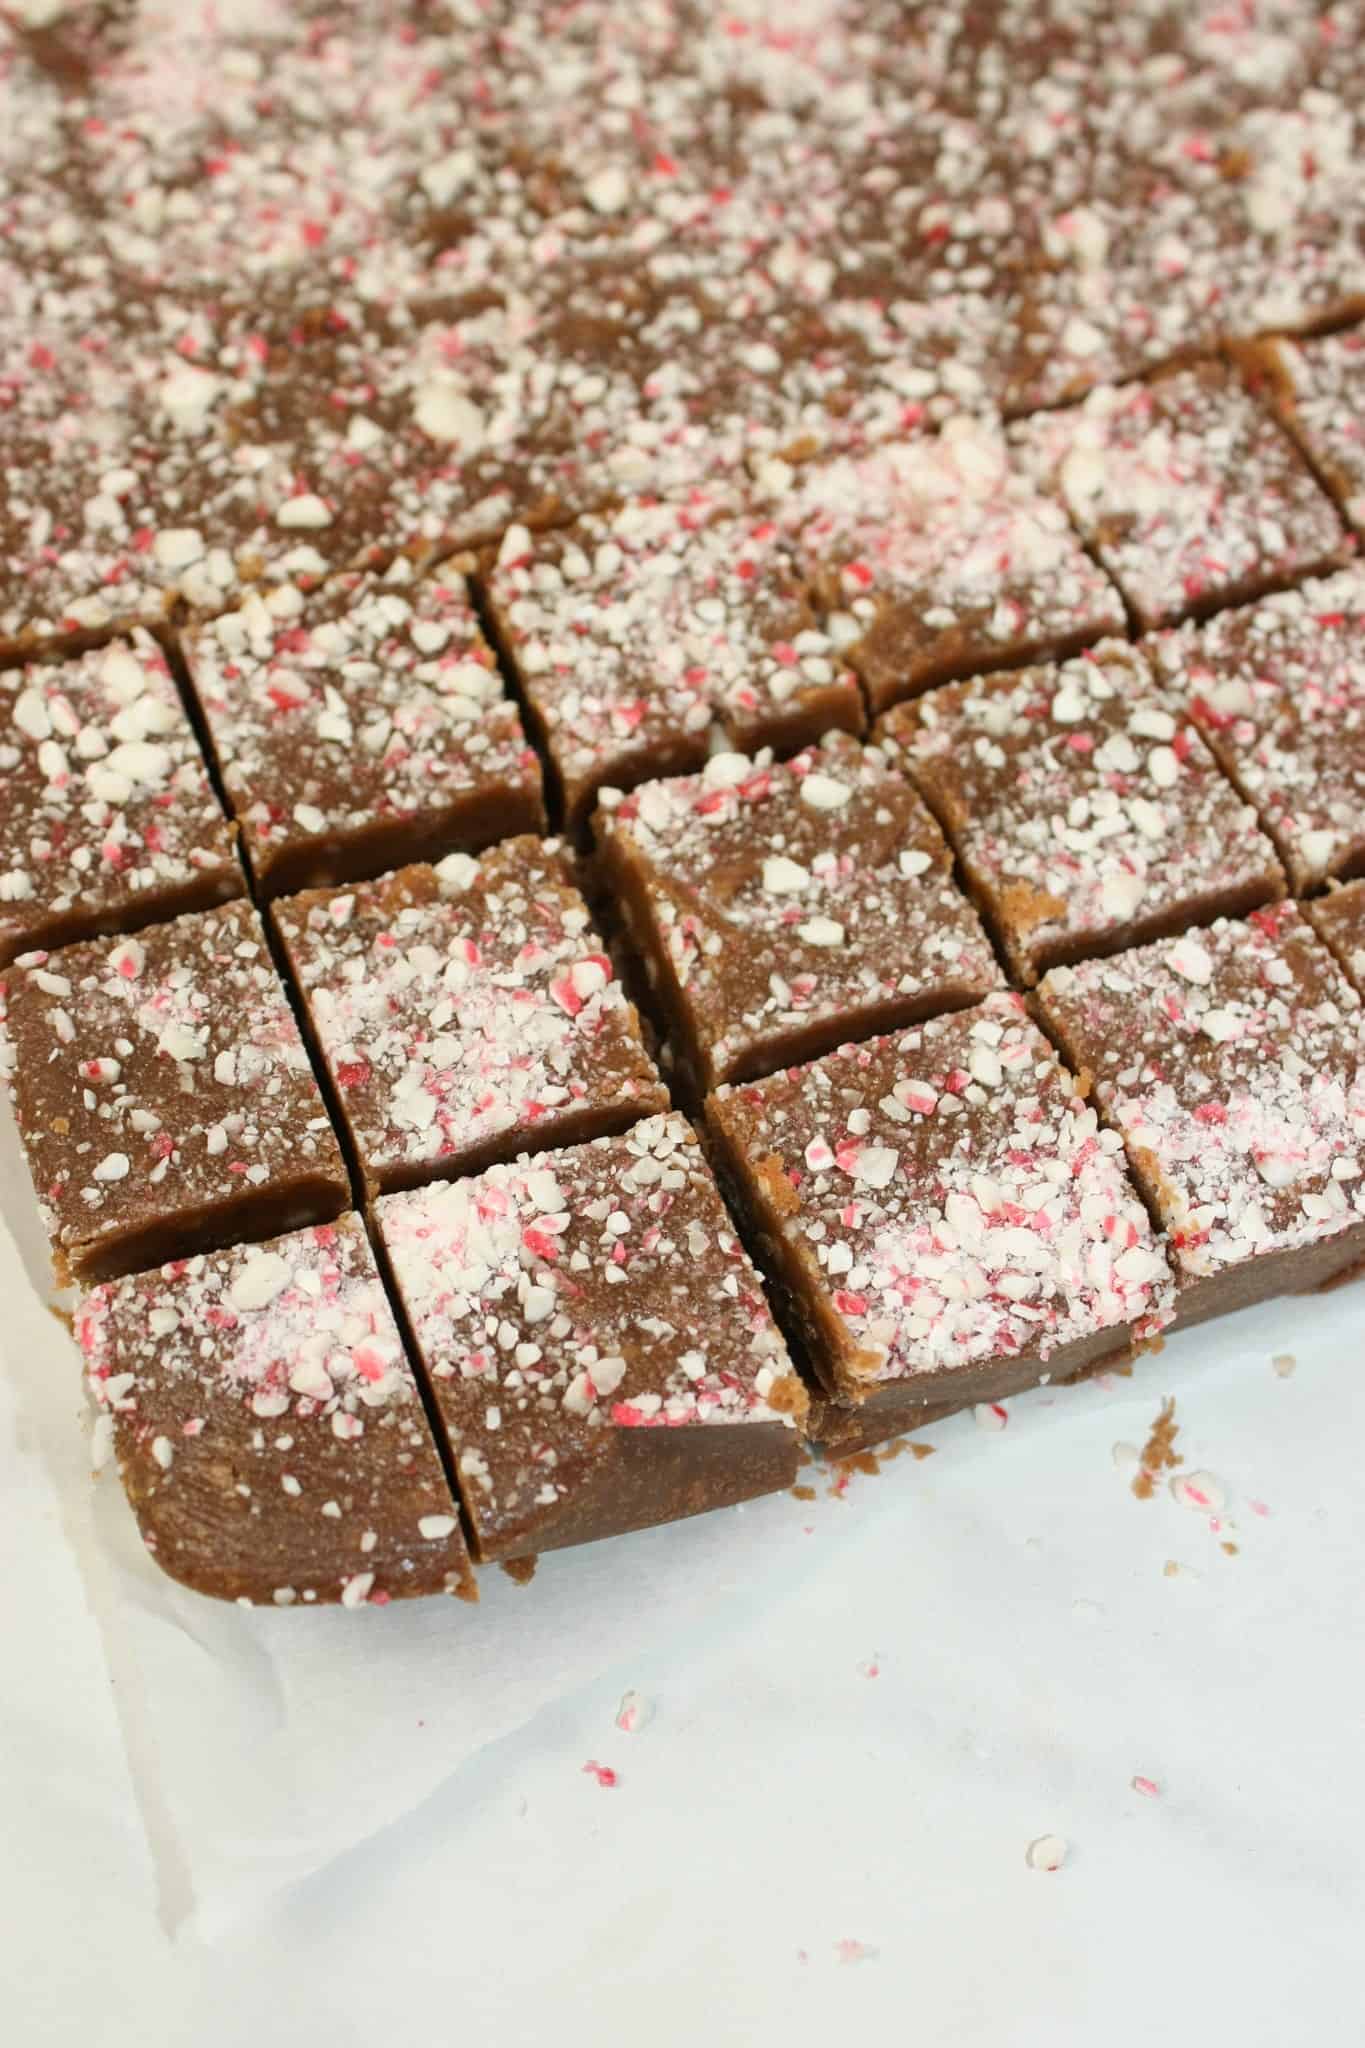 Melt in your mouth Chocolate Peppermint Fudge is hard to resist! This easy to create chocolate treat is a morsel of deliciousness that makes it hard to eat just one!!